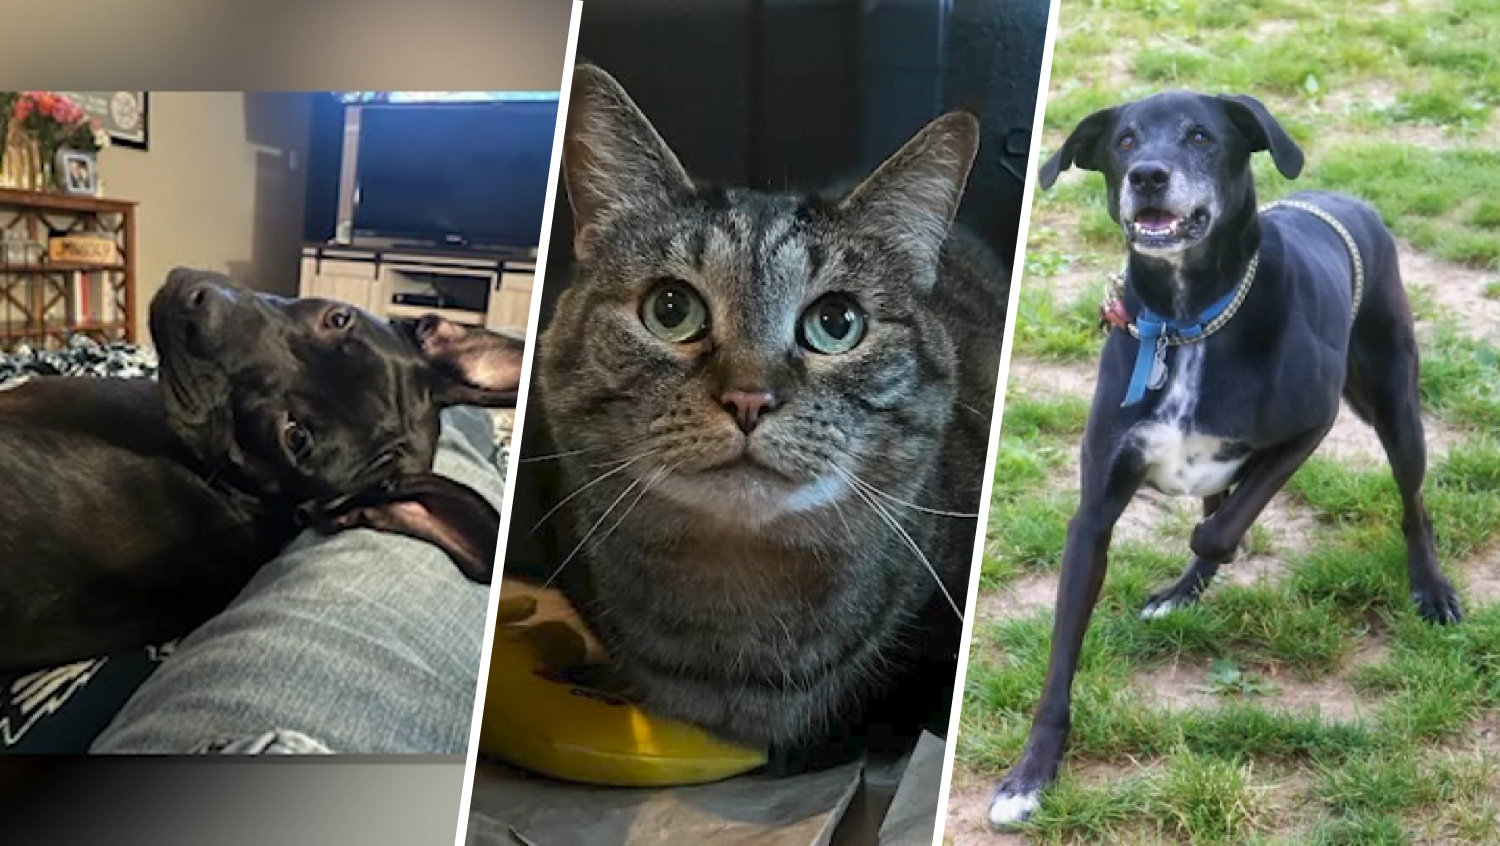 Looking to adopt a pet? Meet these long-time shelter animals looking for a home